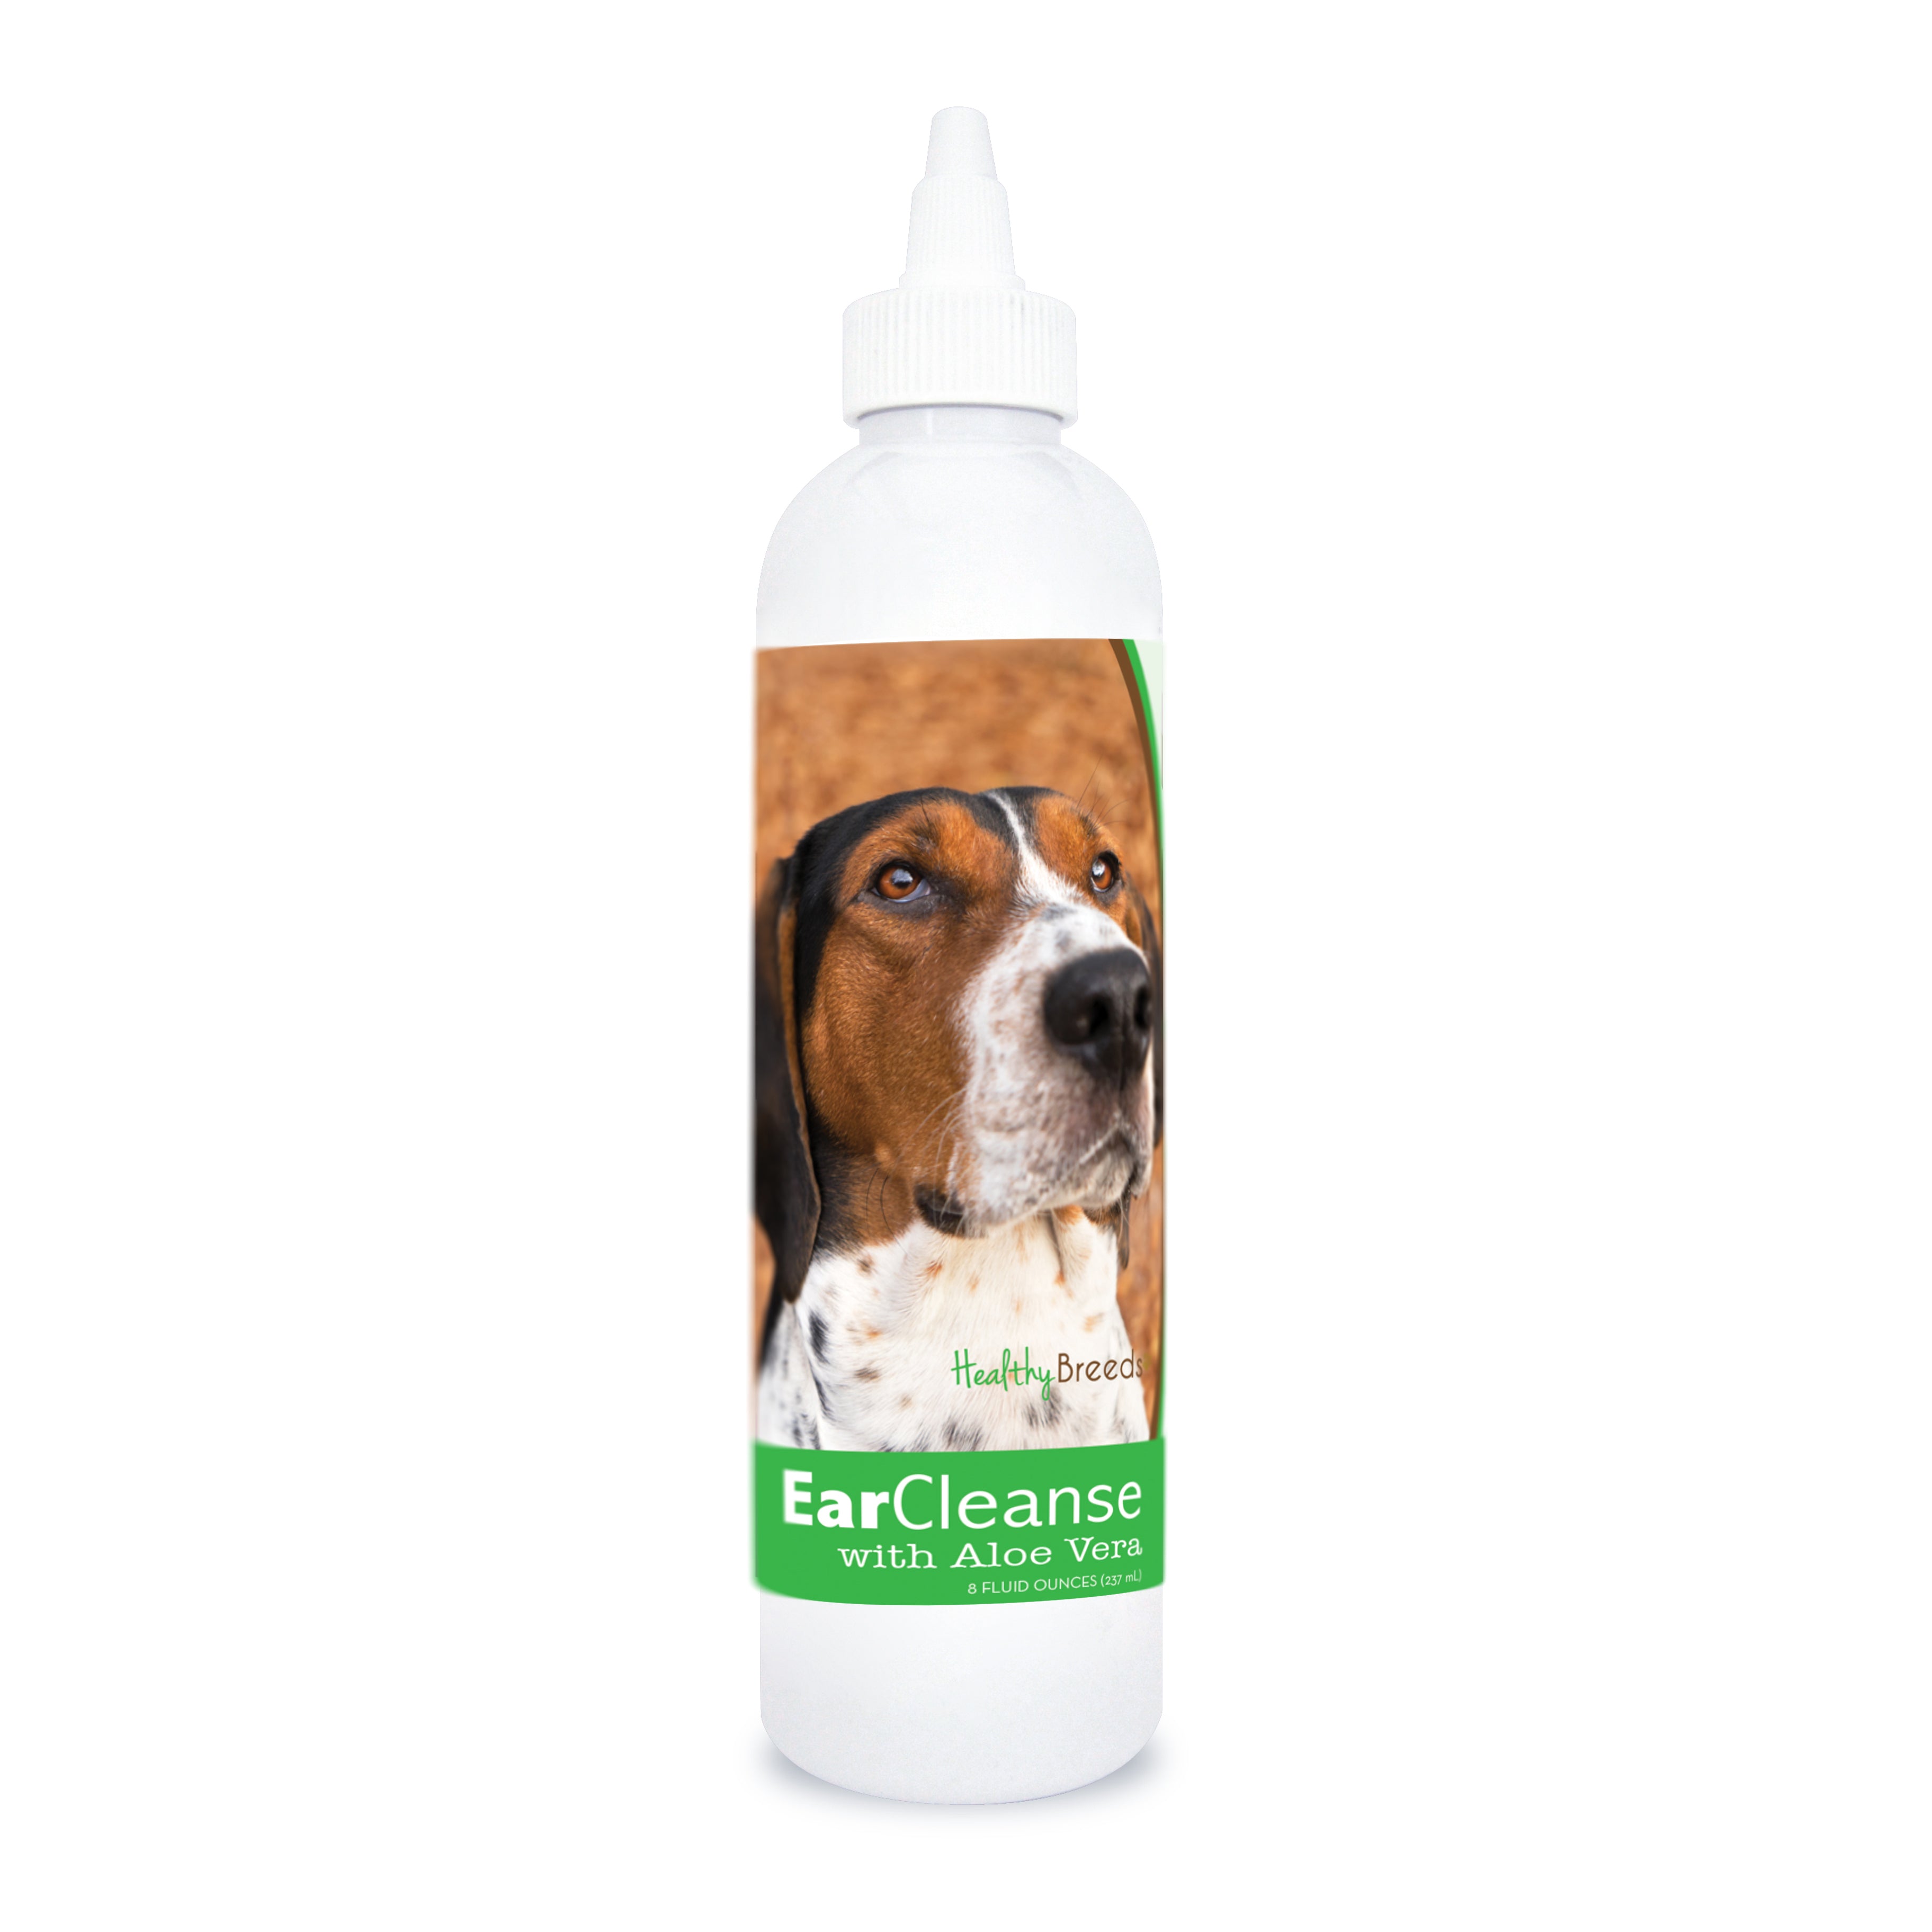 Treeing Walker Coonhound Ear Cleanse with Aloe Vera Cucumber Melon 8 oz